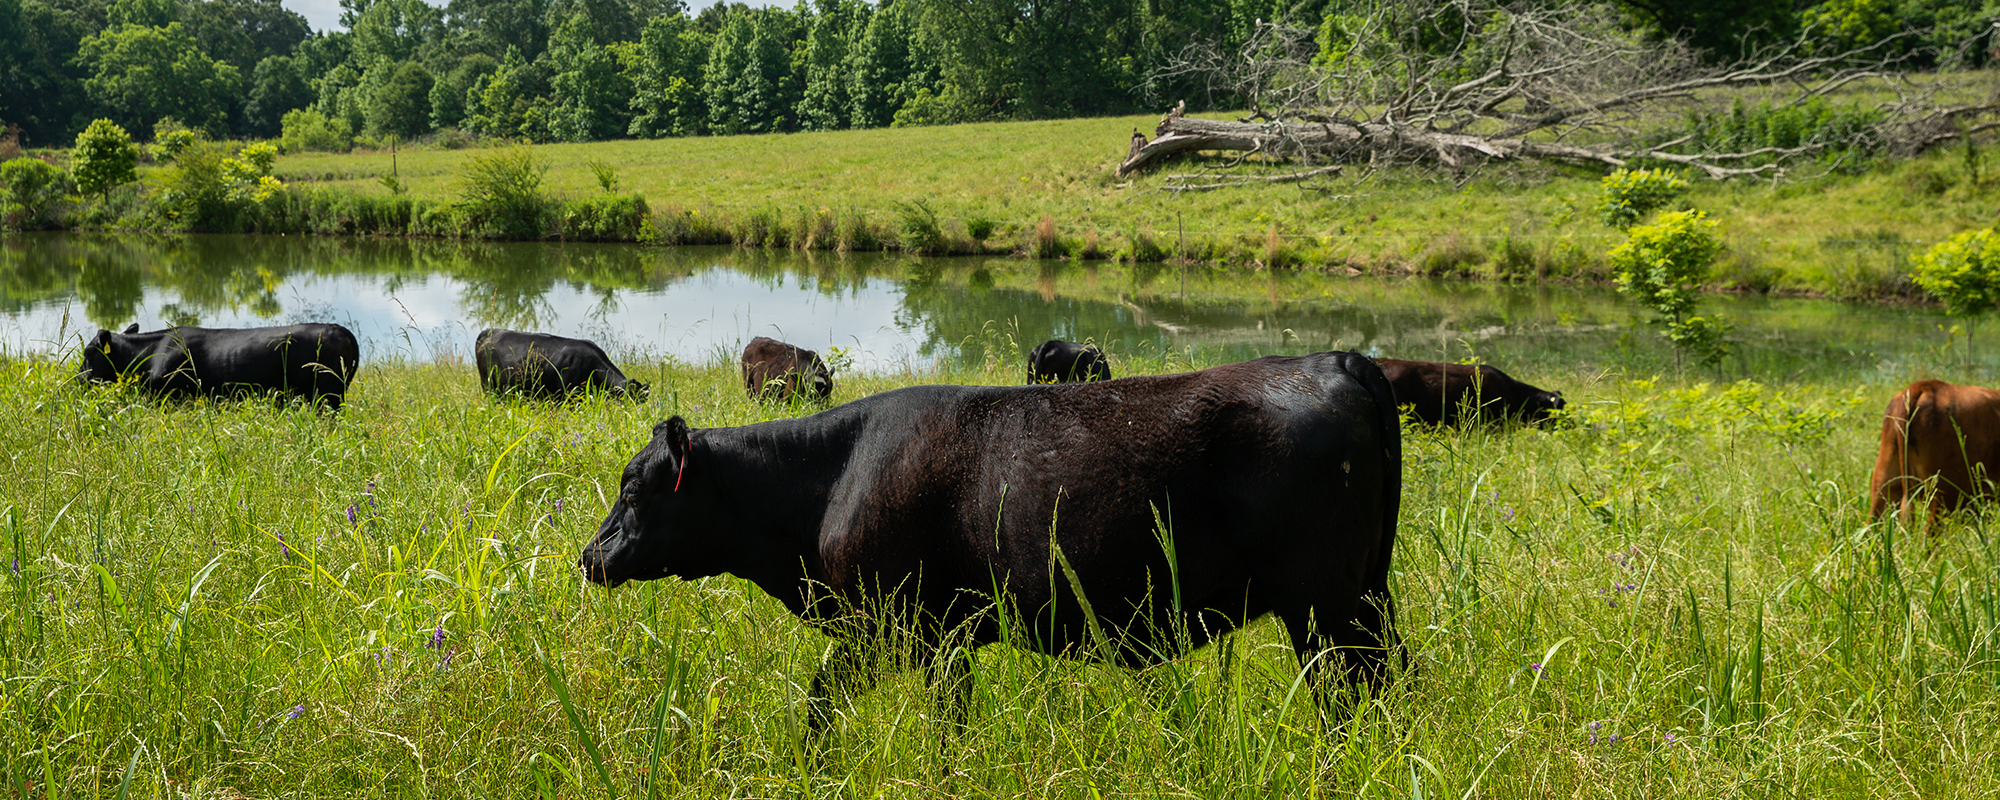 Resources for managing ponds and water access when regeneratively grazing livestock